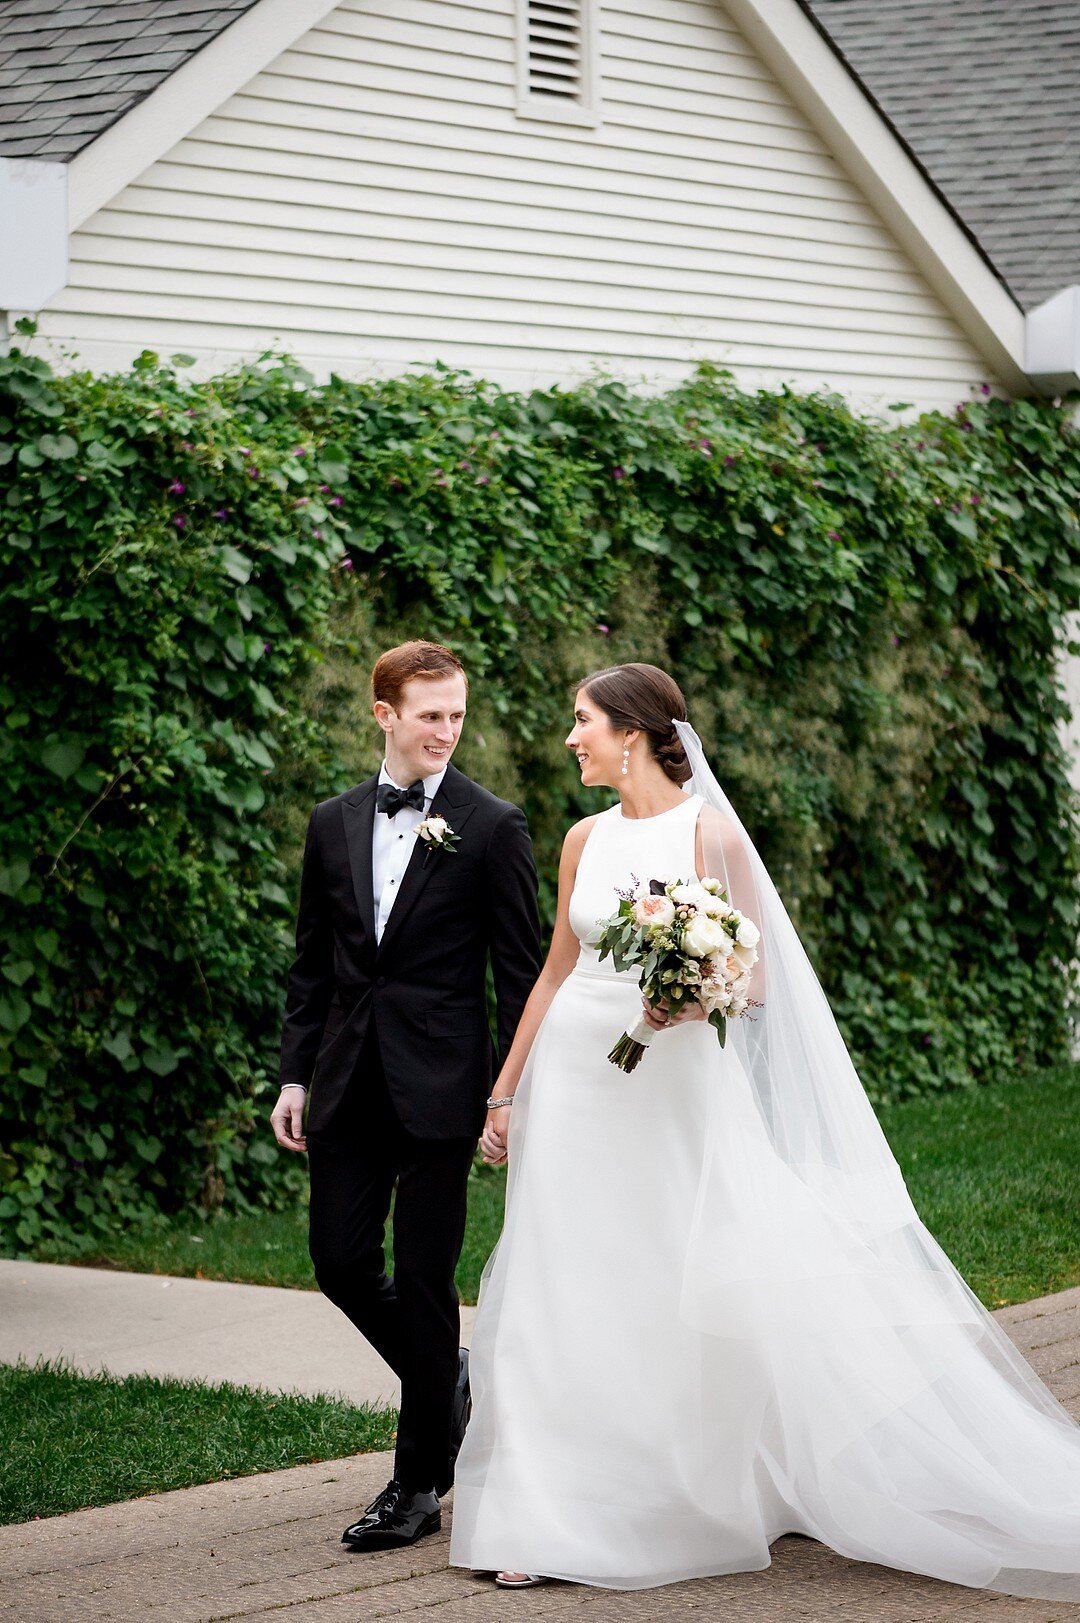 Classic and Romantic Chicago Wedding with Pops of Burgundy captured by Julia Franzosa Photography. See more timeless wedding ideas at CHItheeWED.com!